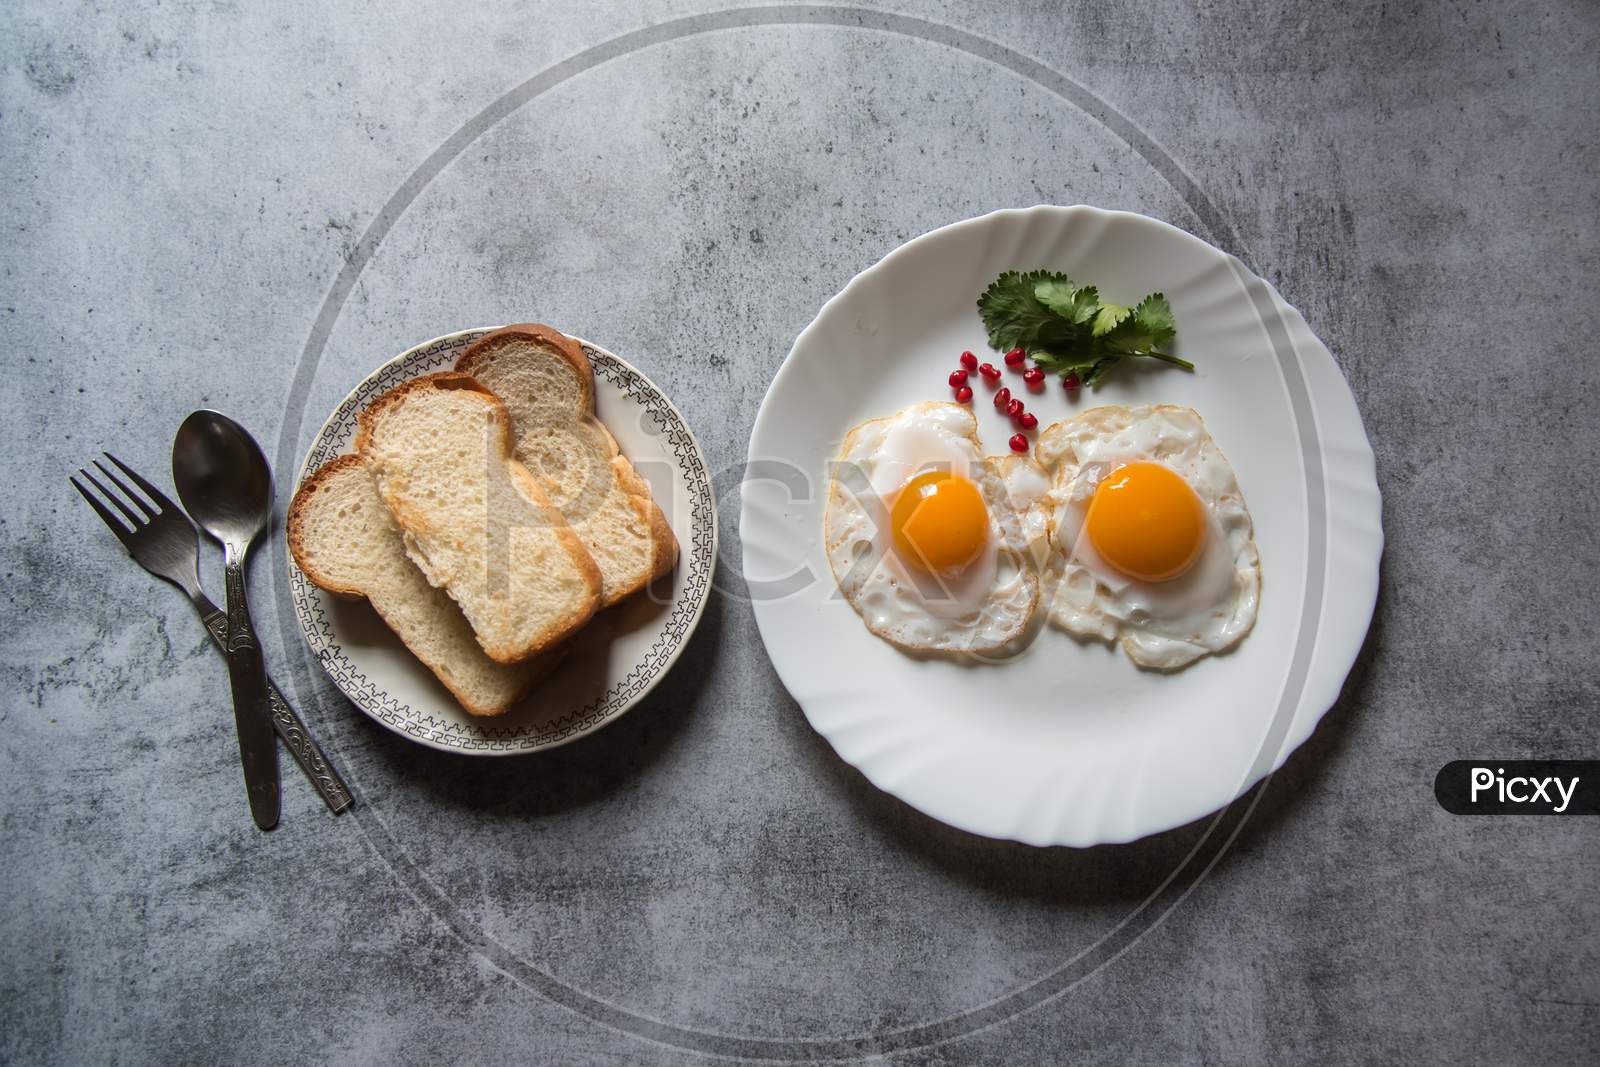 Bread slices and egg poaches are a popular breakfast ingredient.